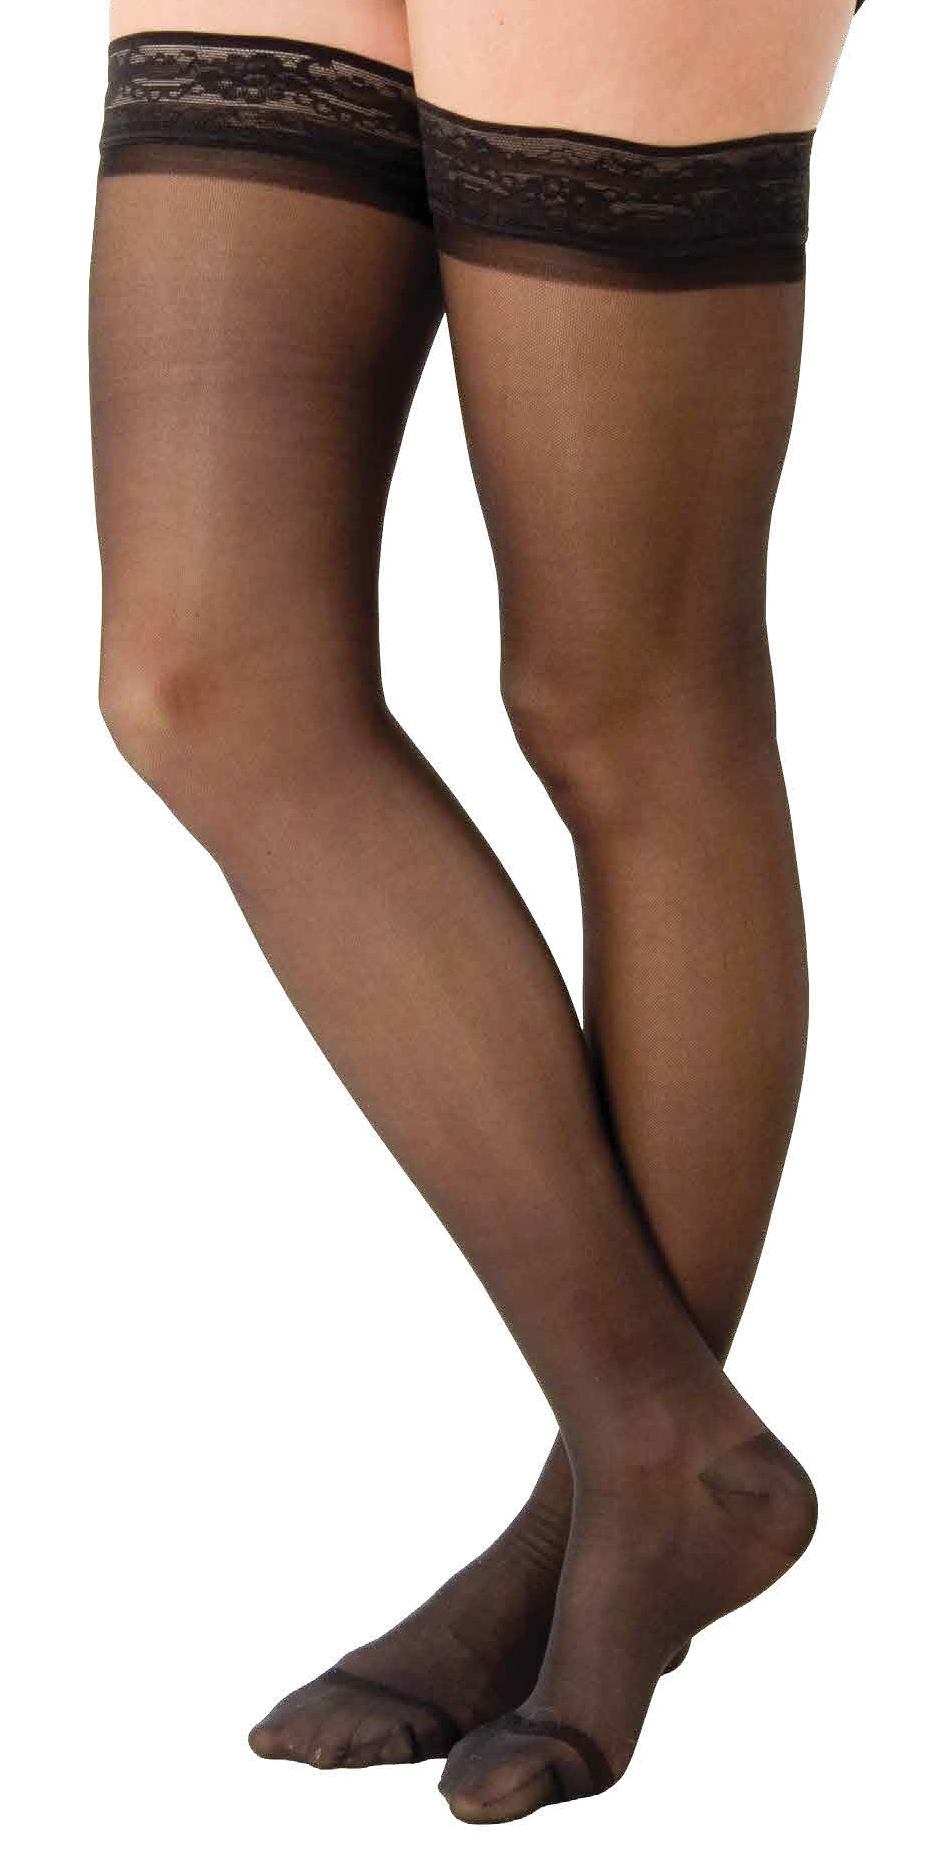 Compression Stockings 101: Everything You Should Know About